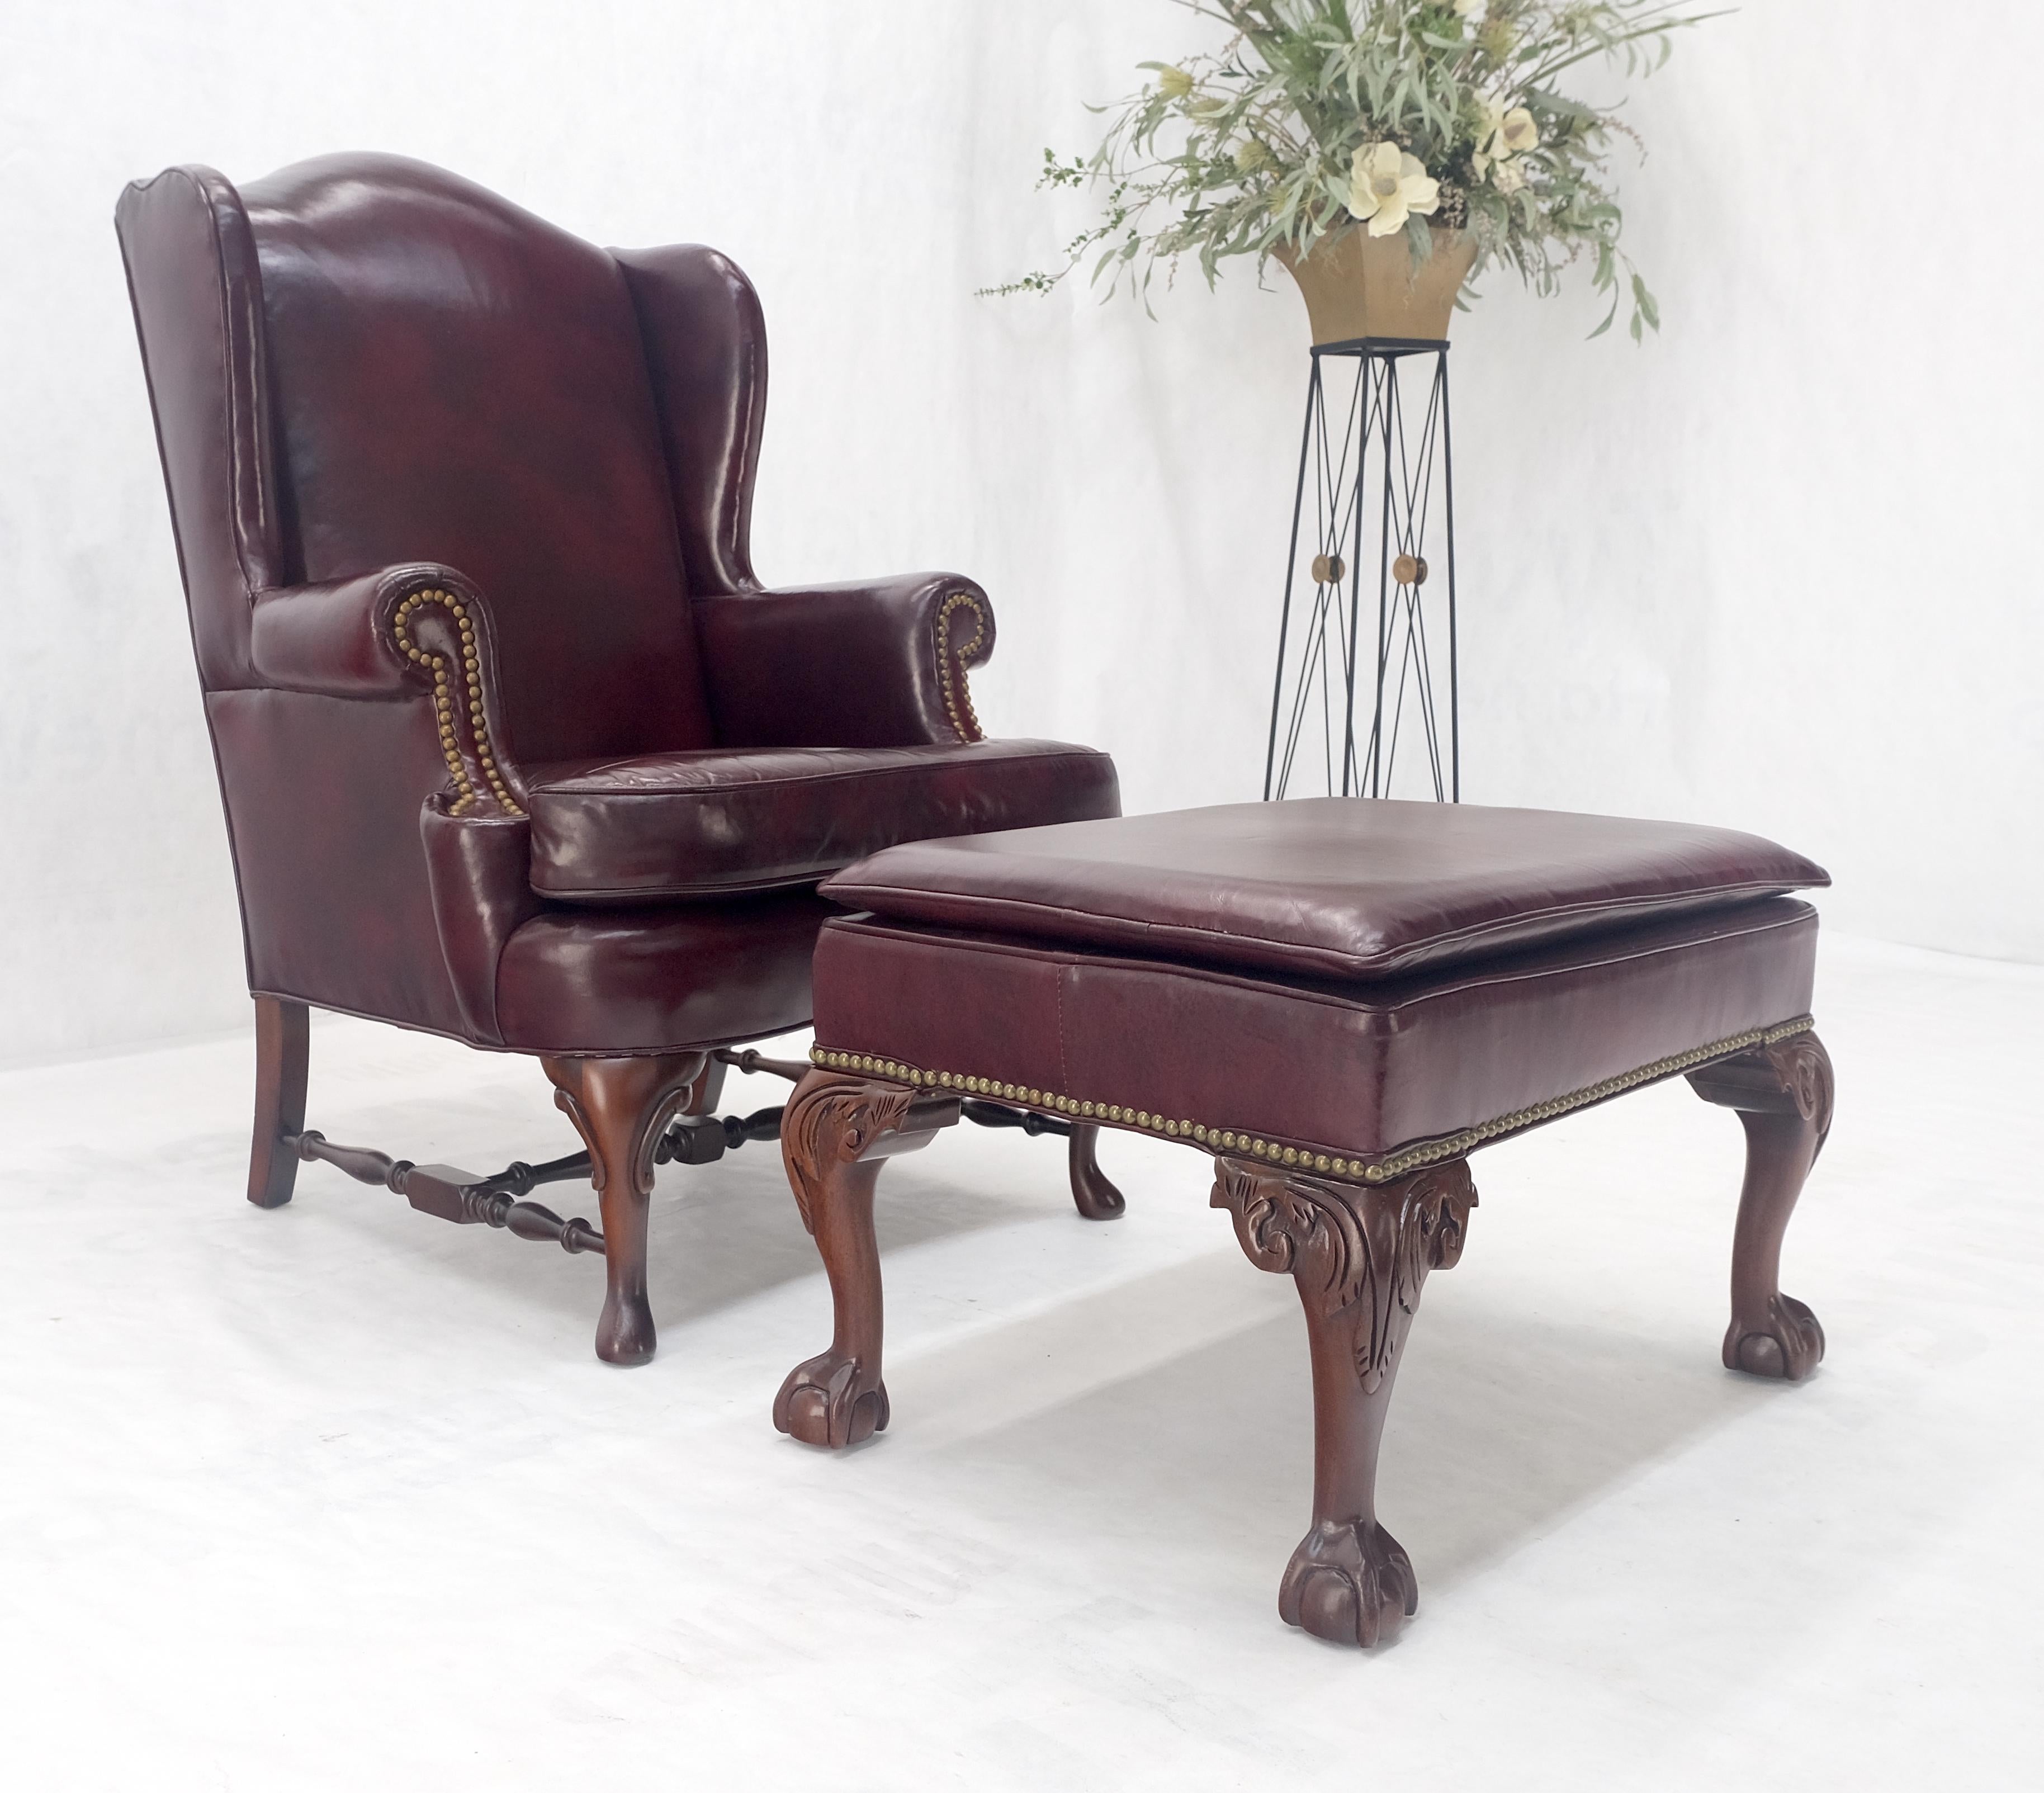 Kindel Burgundy Leather Upholstery Carved Mahogany Legs Wingback Chair & Ottoman en vente 3